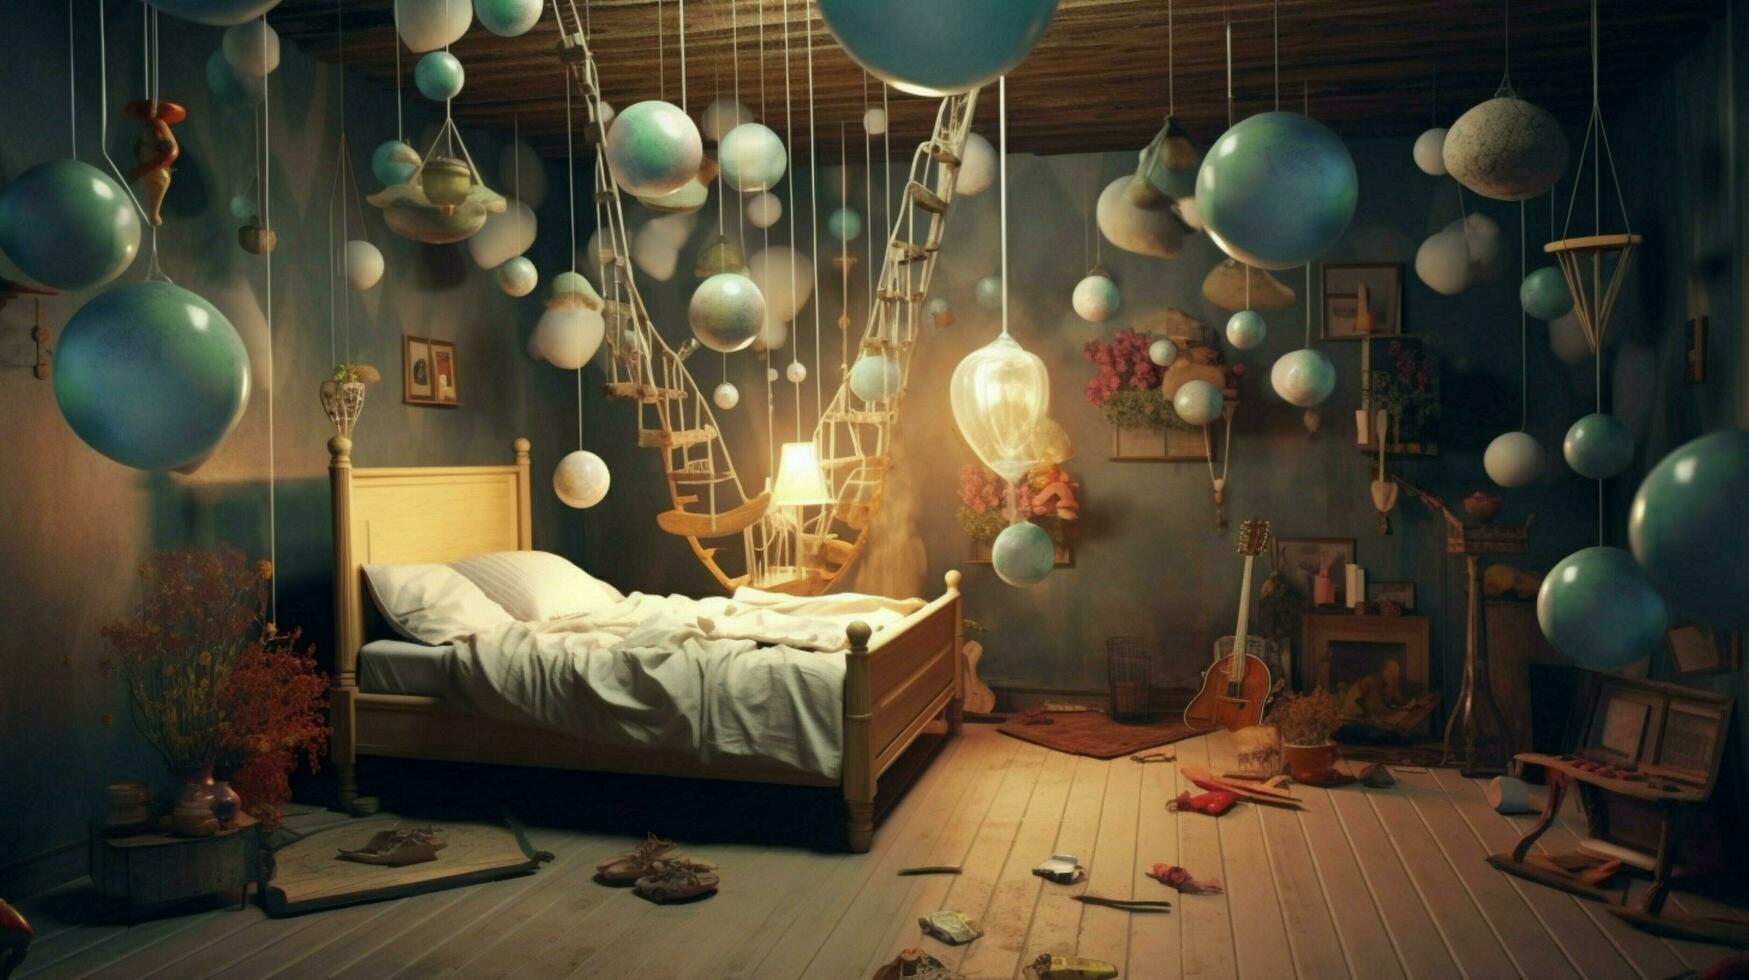 surrealistic room with floating objects and dream photo